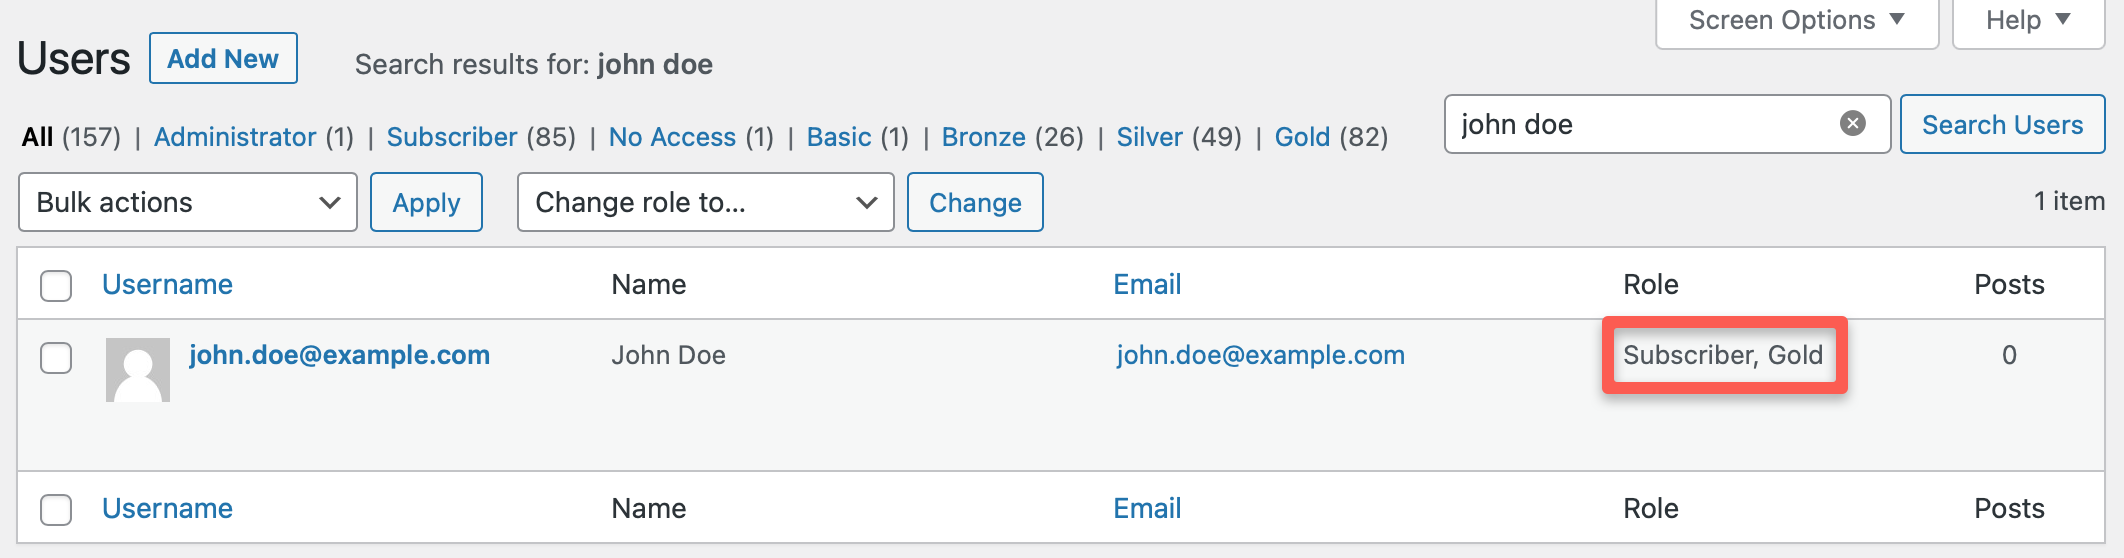 All roles are listed for users on the Users page.